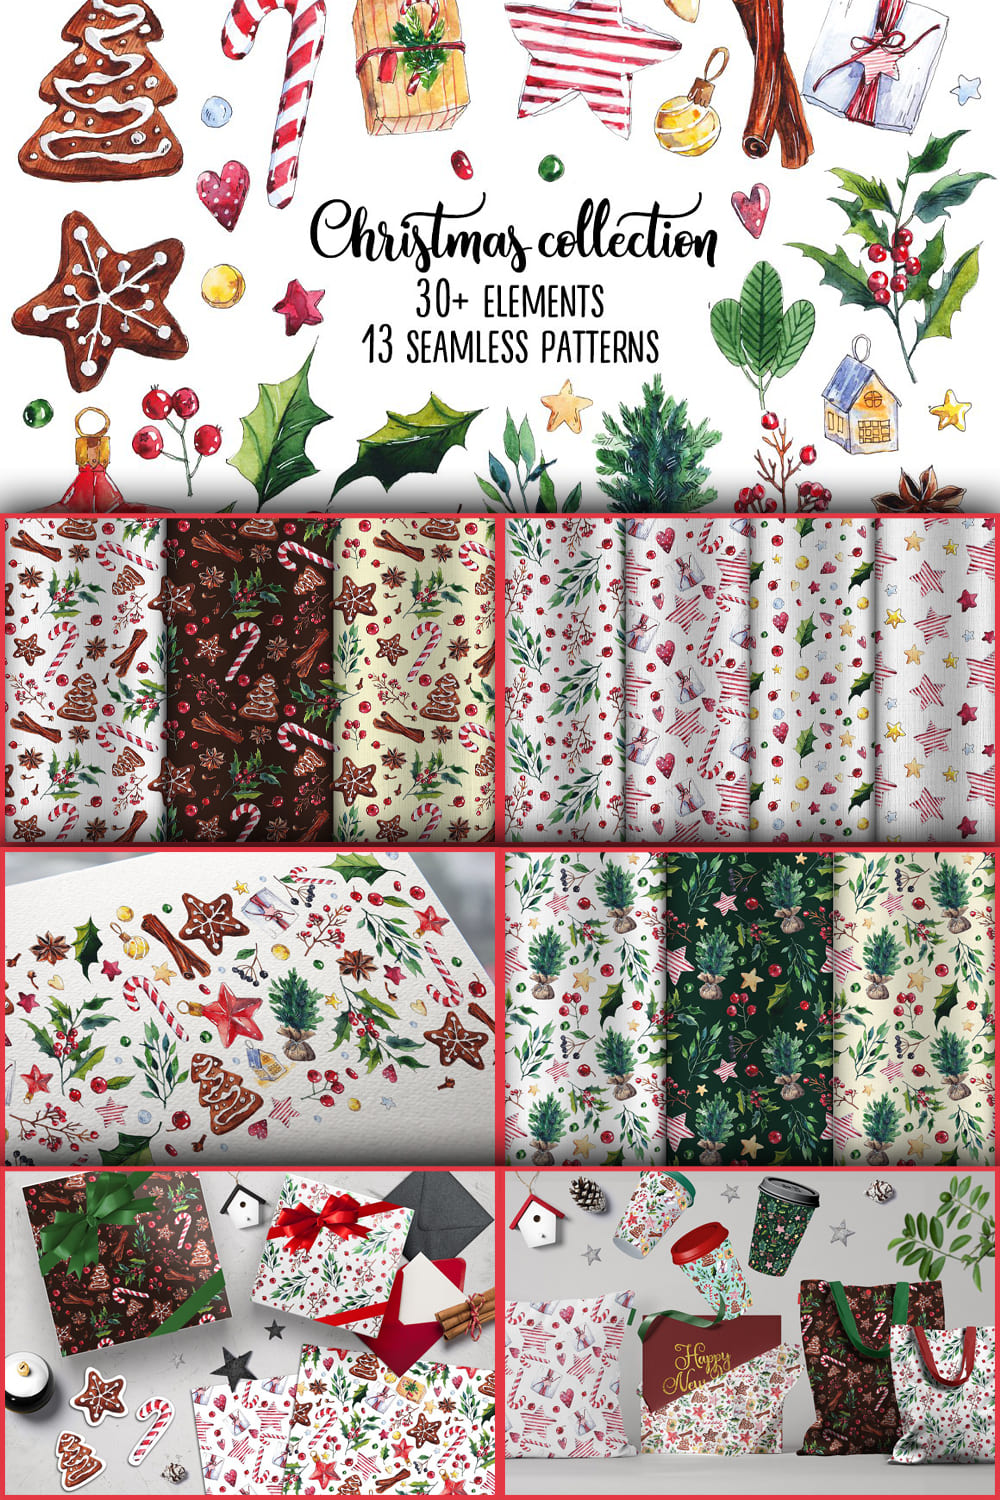 Watercolor Christmas Collection - Pinterest.